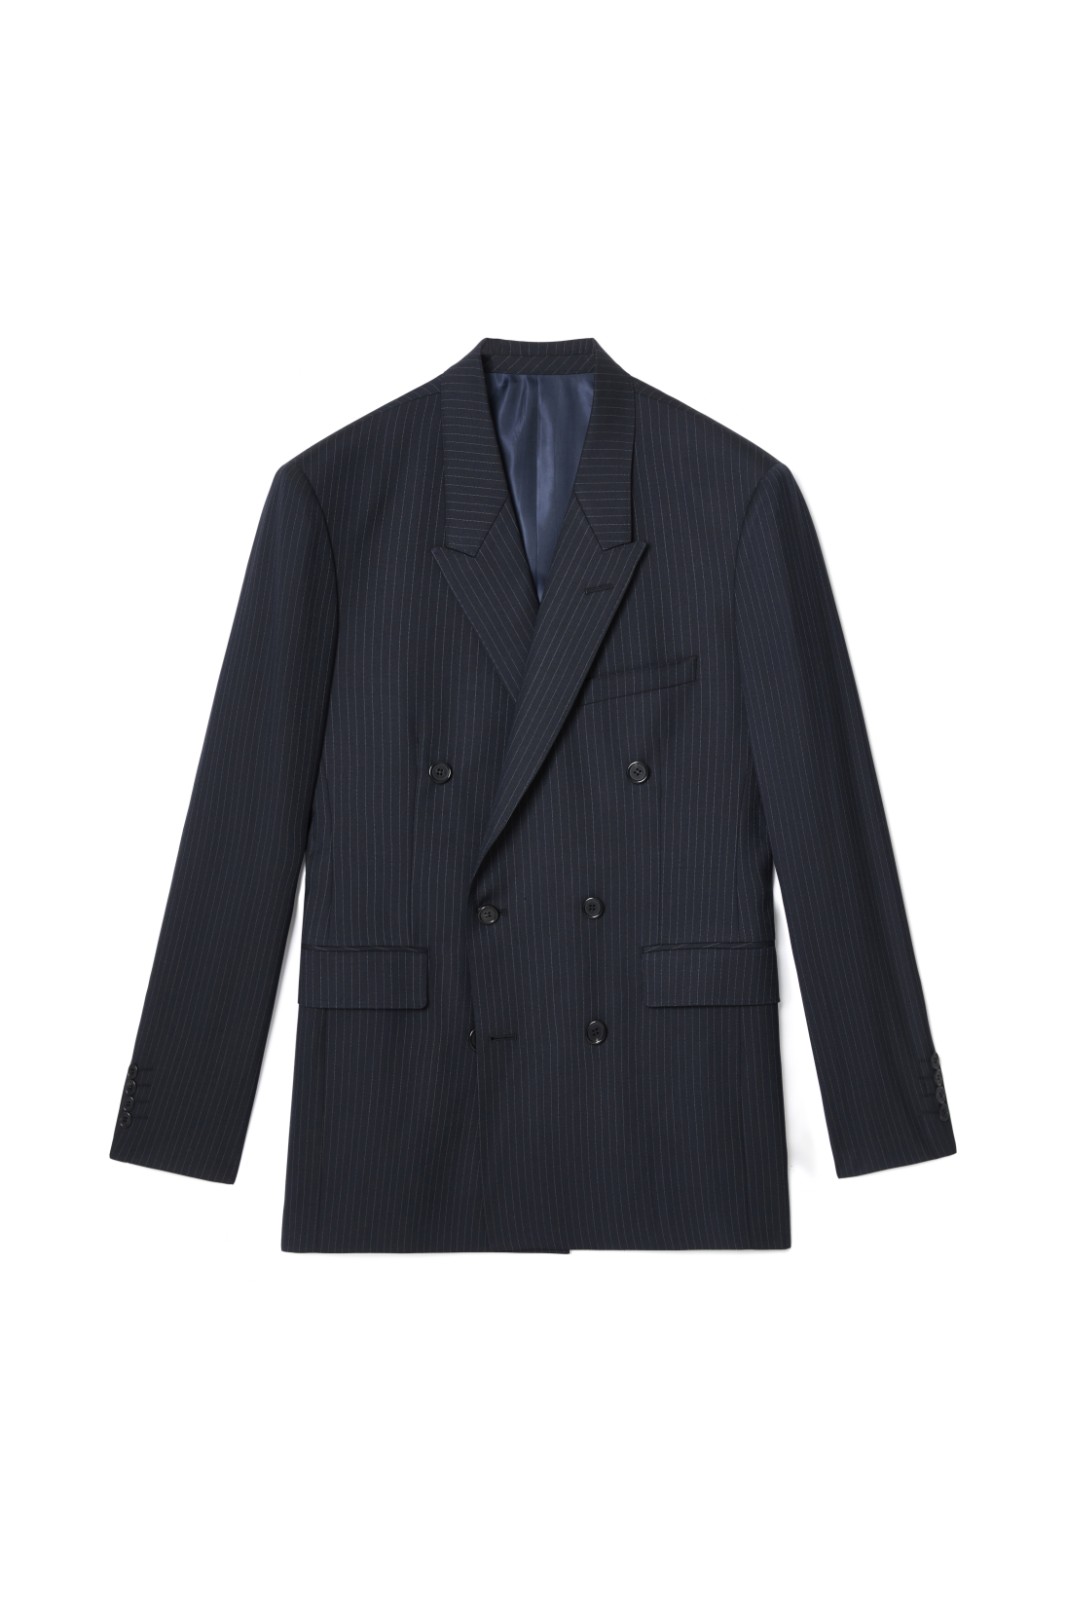 DOUBLE BREASTED JACKET IN NAVY PINSTRIPE